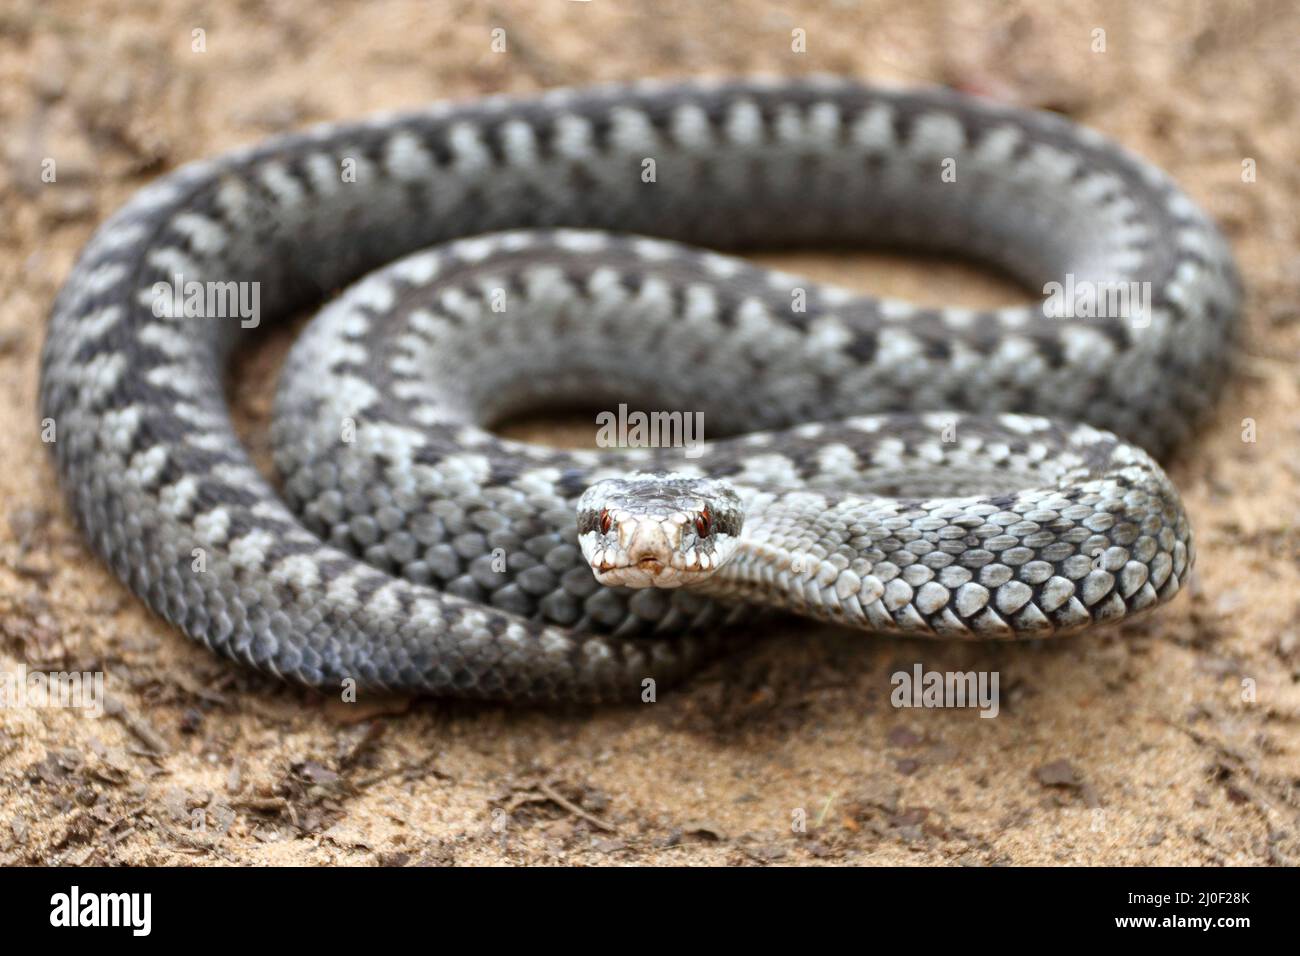 Grey viper or adder venomous snake in attacking or defencive pose rolled in knit on brown spring soil Stock Photo